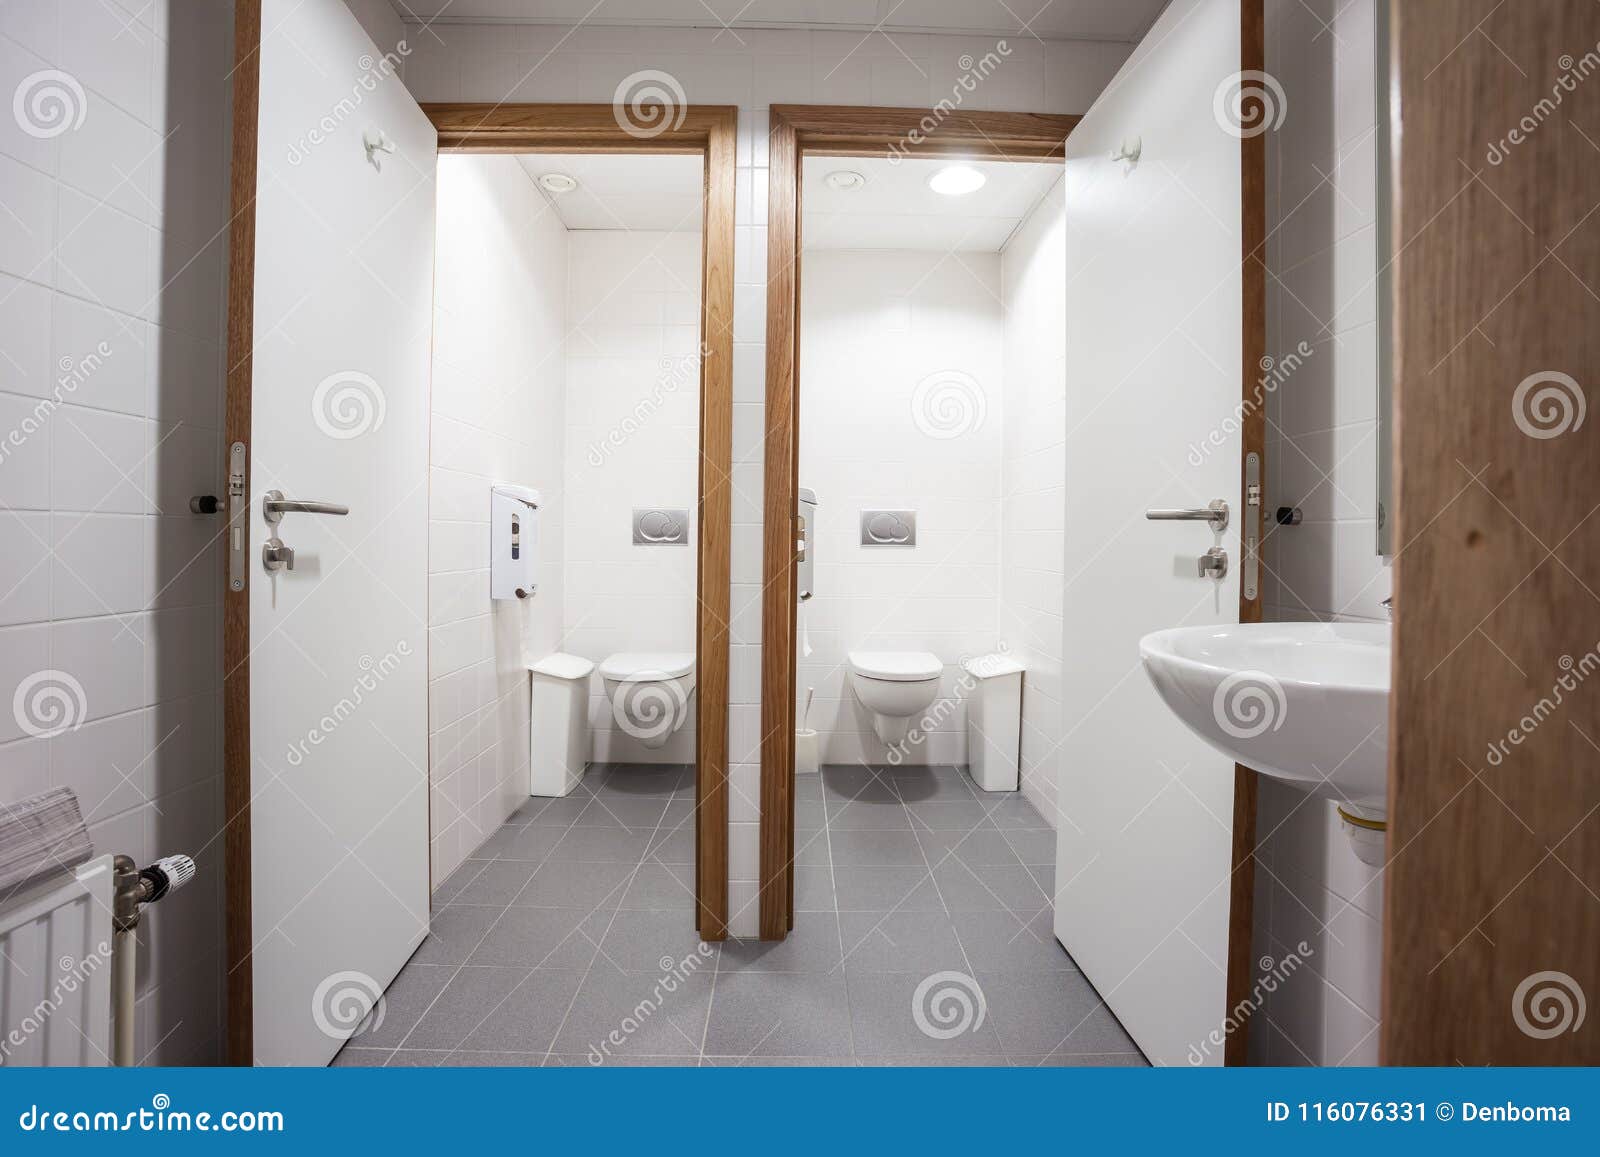 Doors From Toilets And Sinks Stock Image Image Of Close